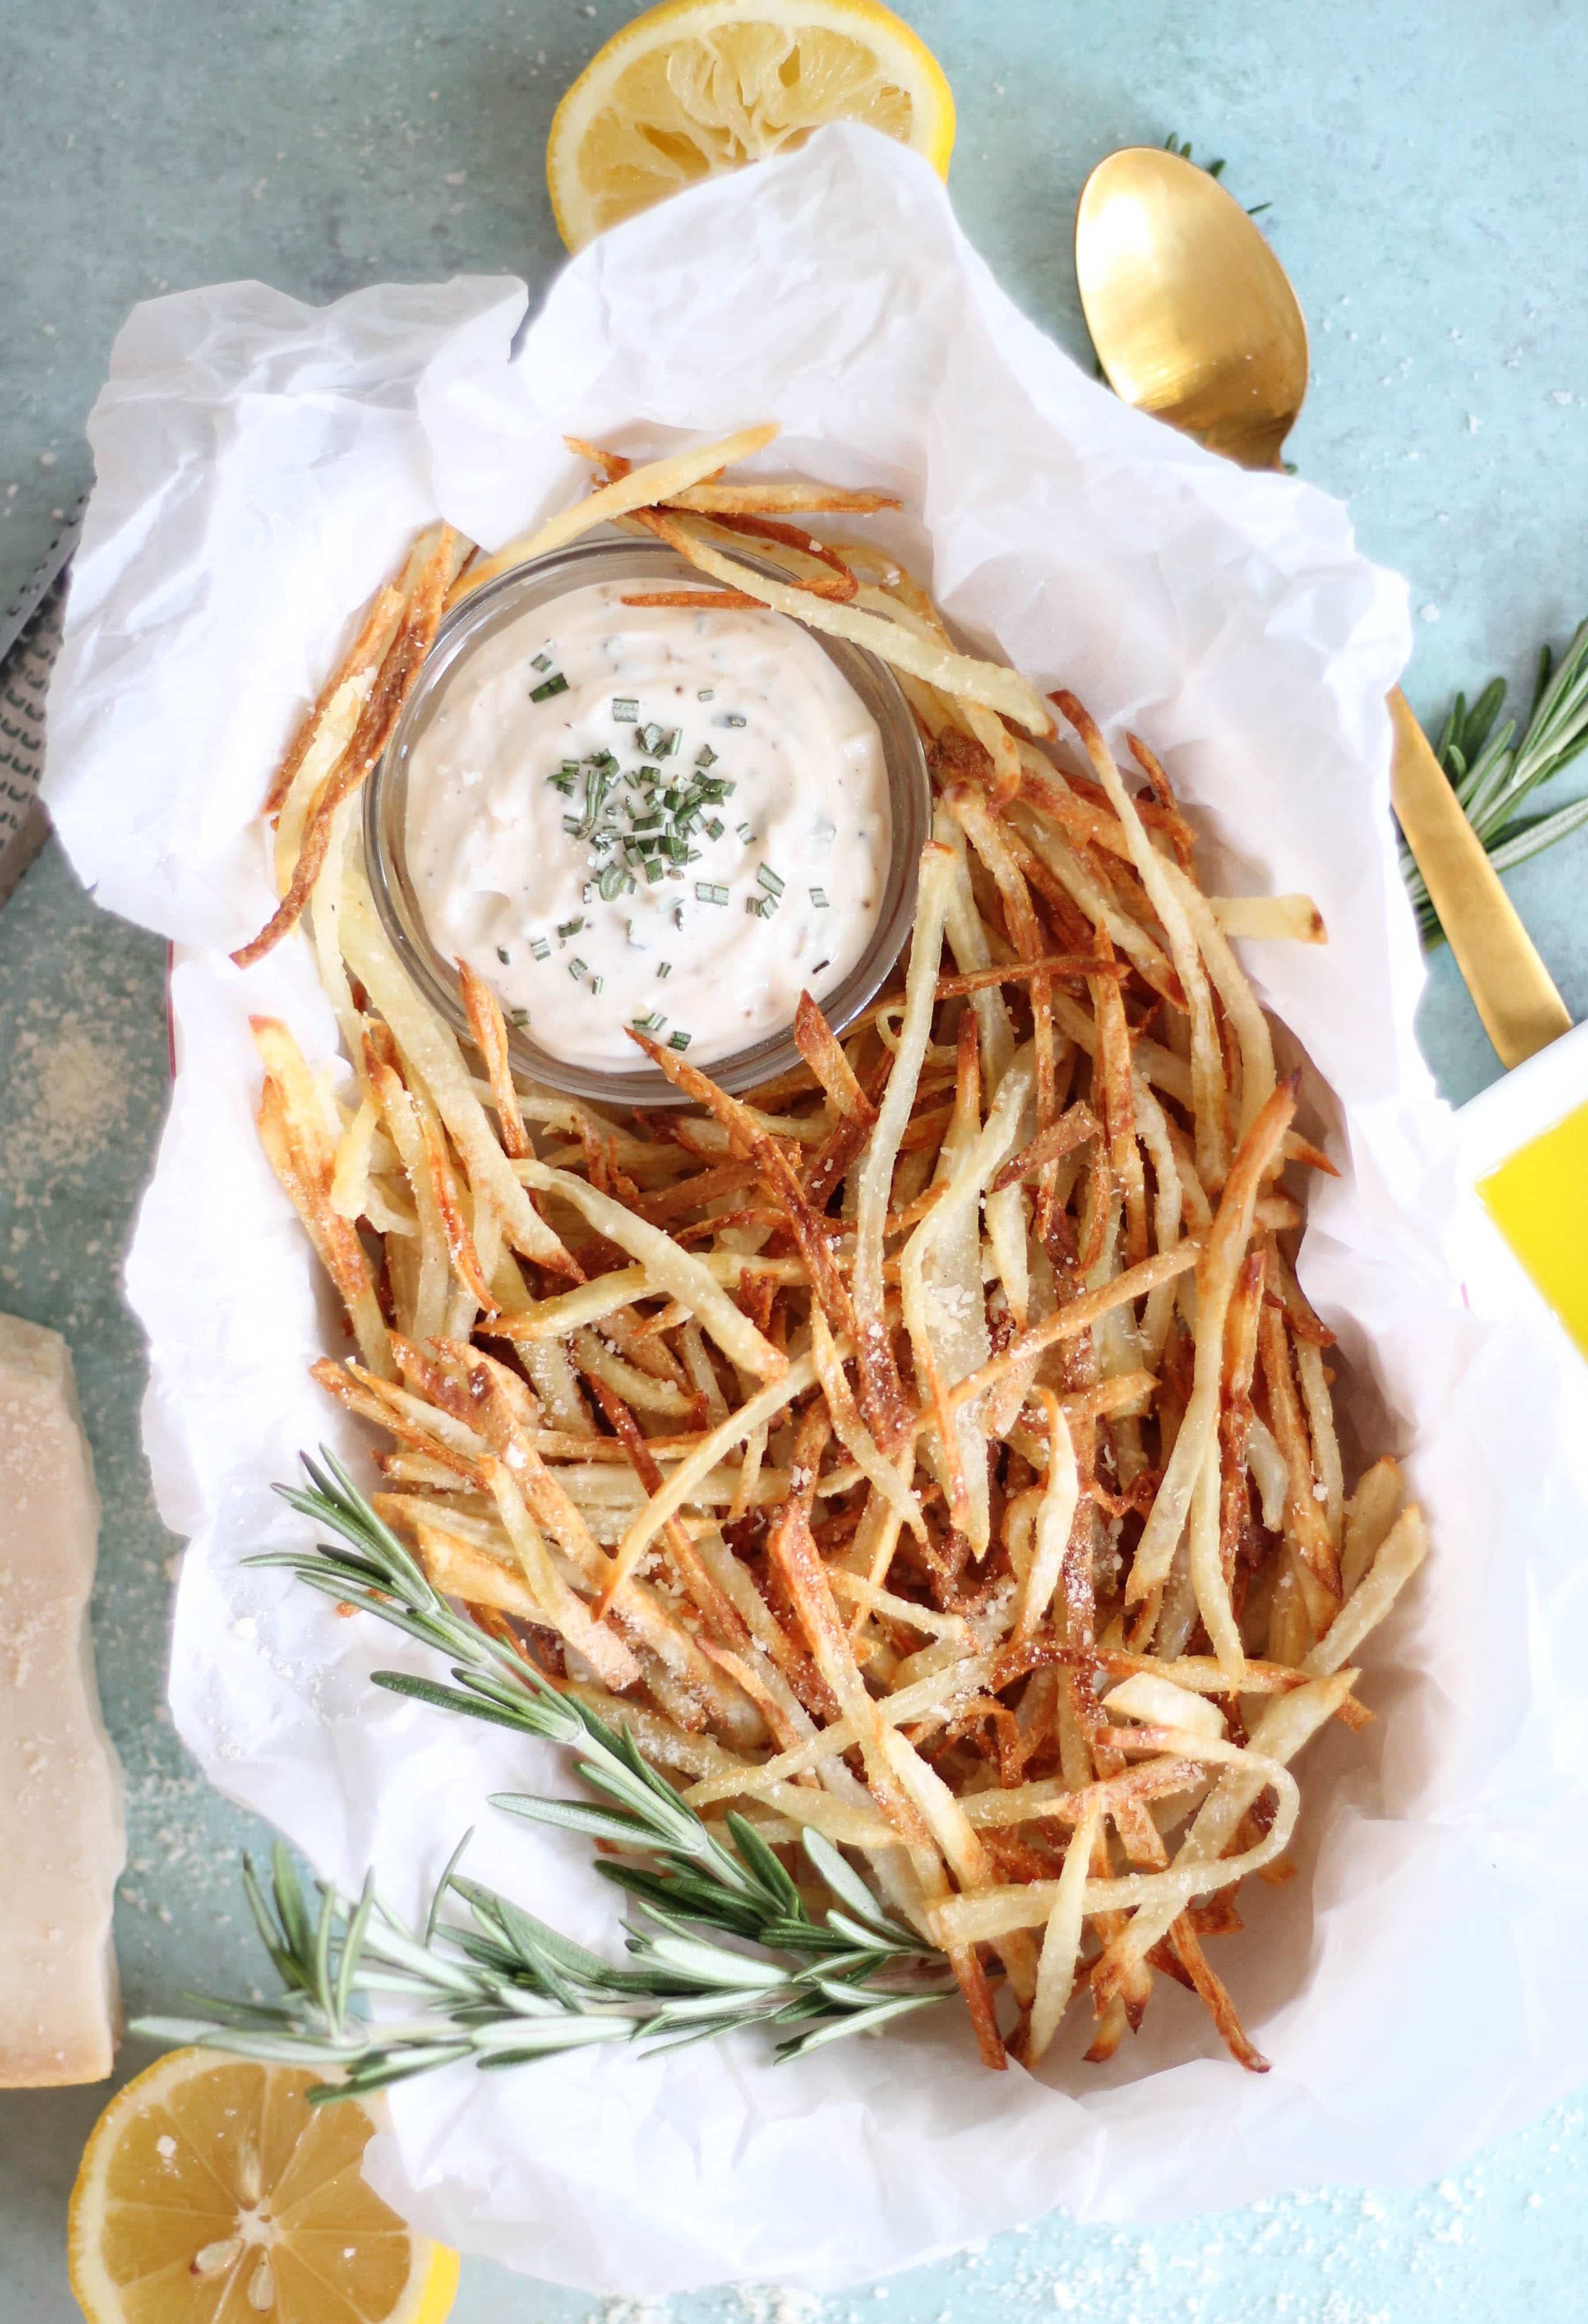 Parmesan Truffle Oven Fries with Rosemary Garlic Aioli